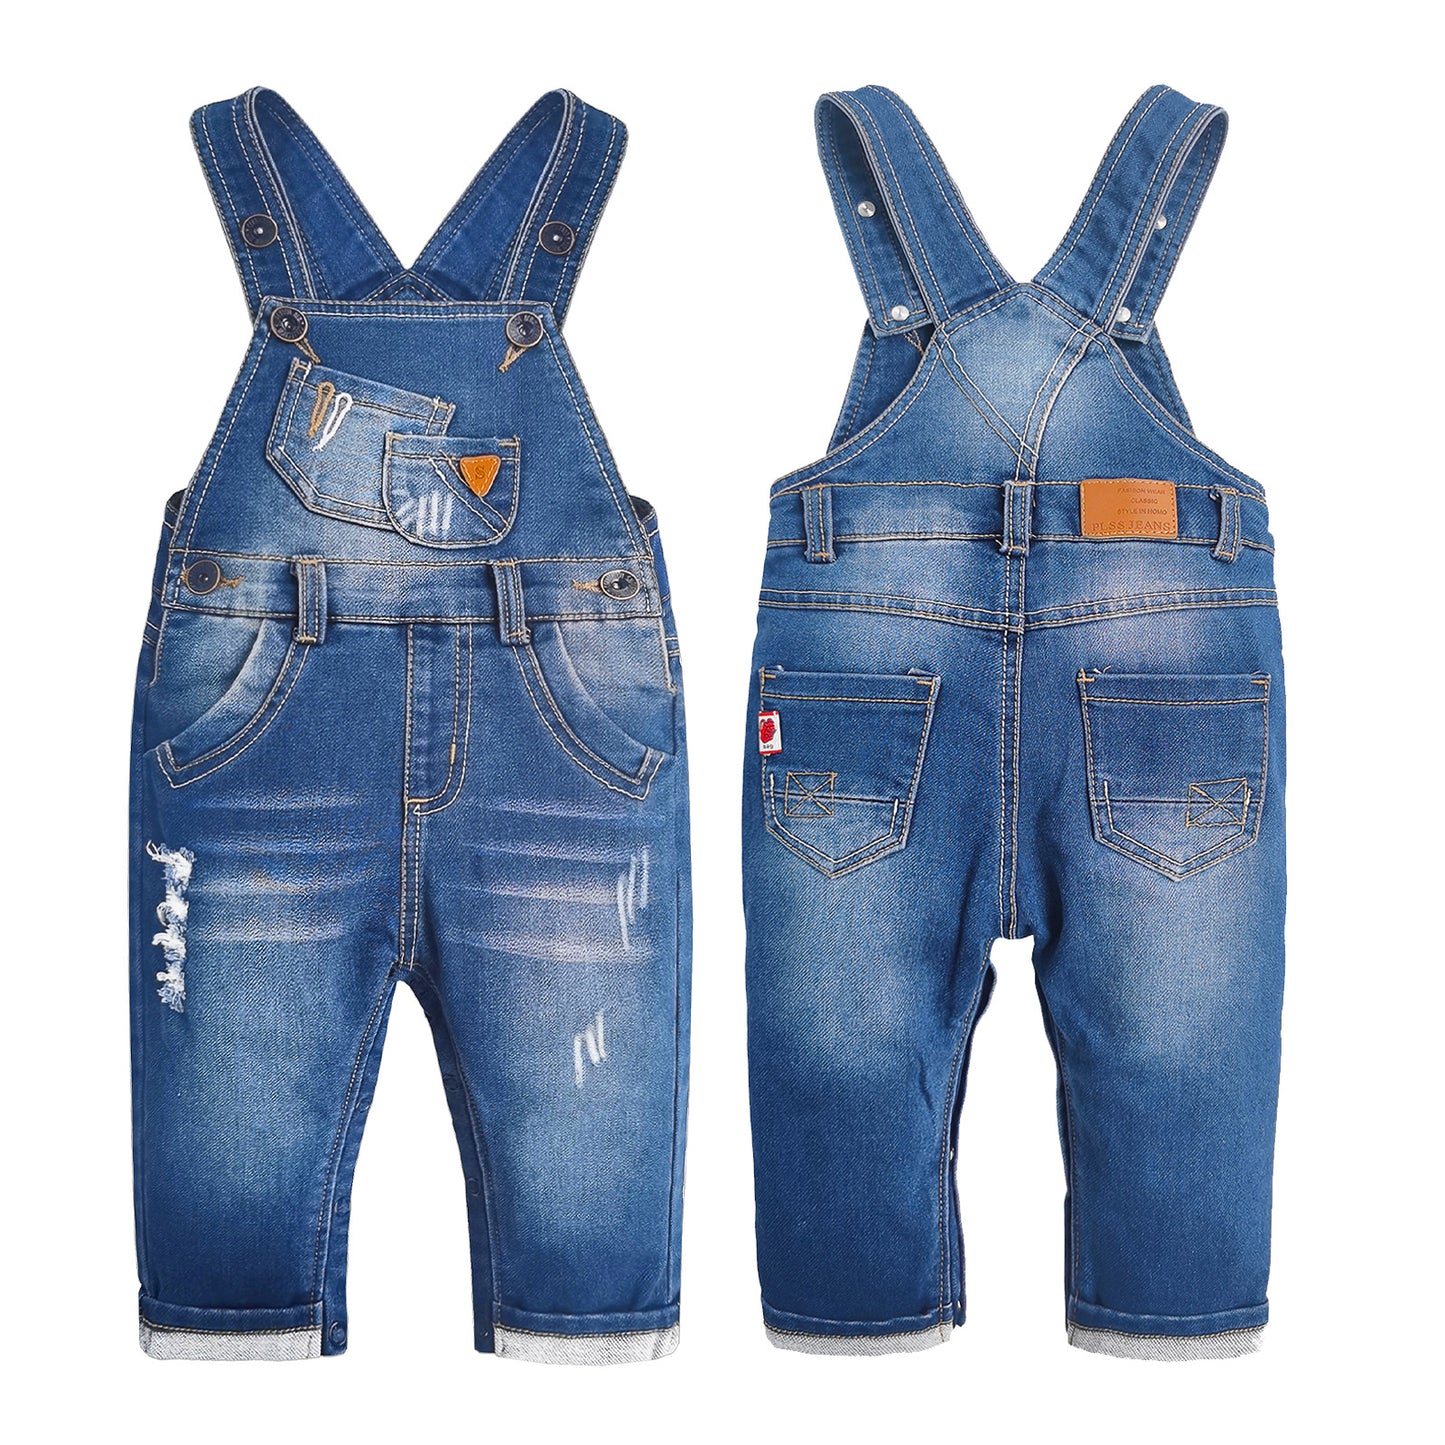 Pure Cotton Ripped 2 Pockets Bibs Jeans Overalls